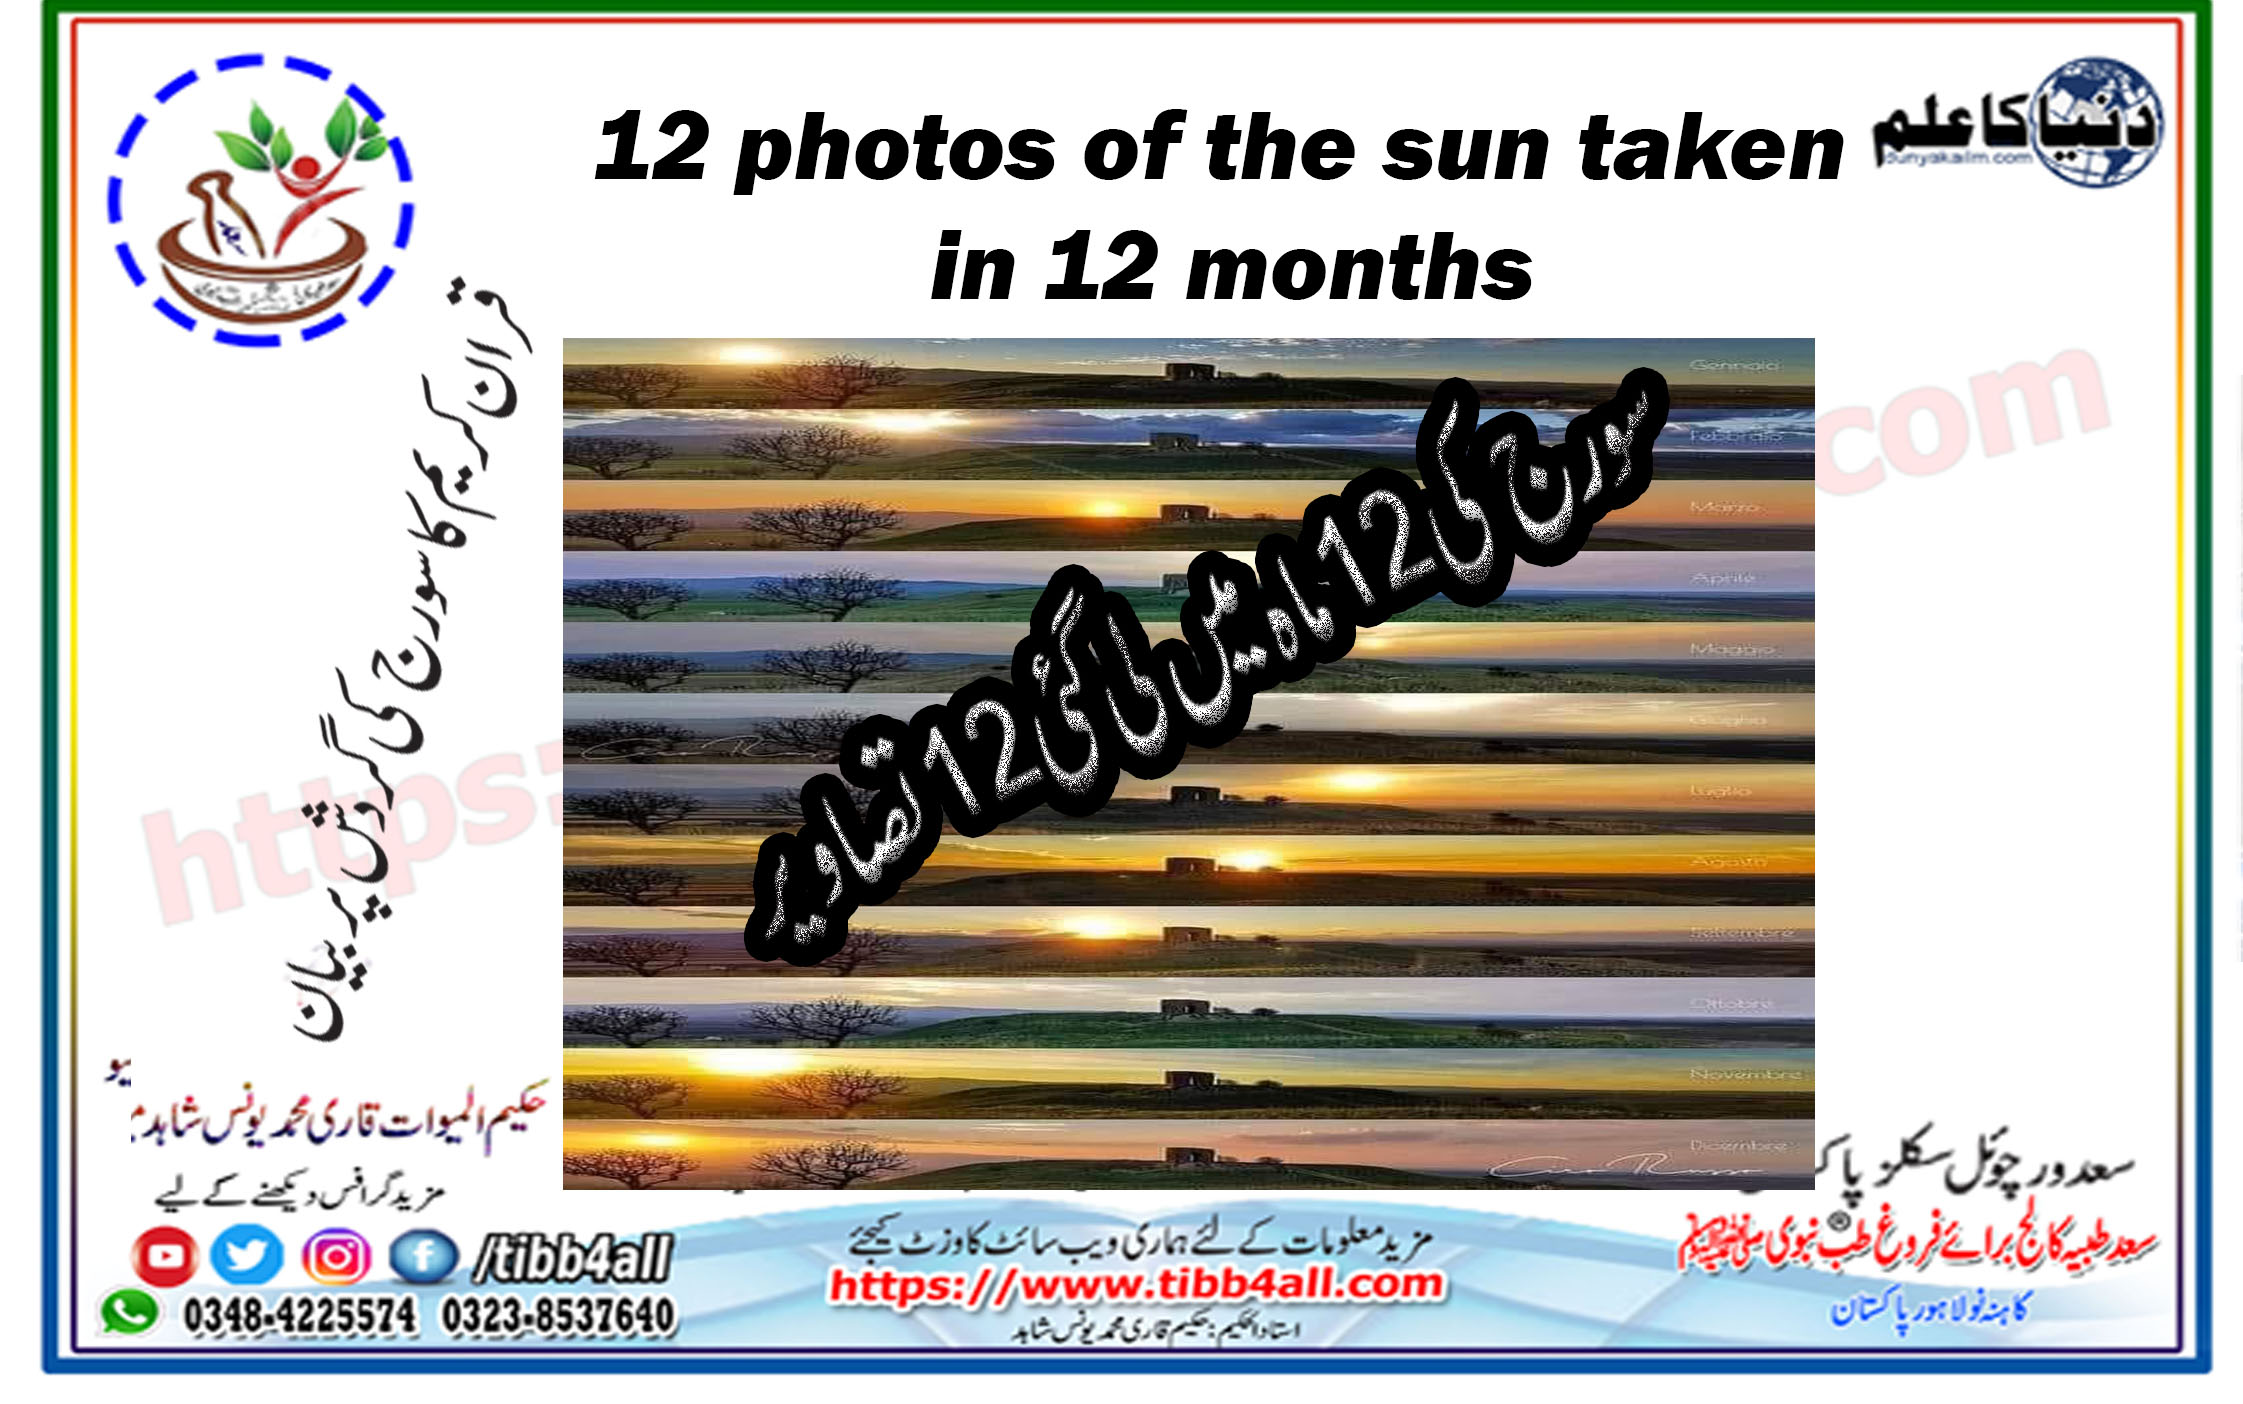 12 photos of the sun taken in 12 months